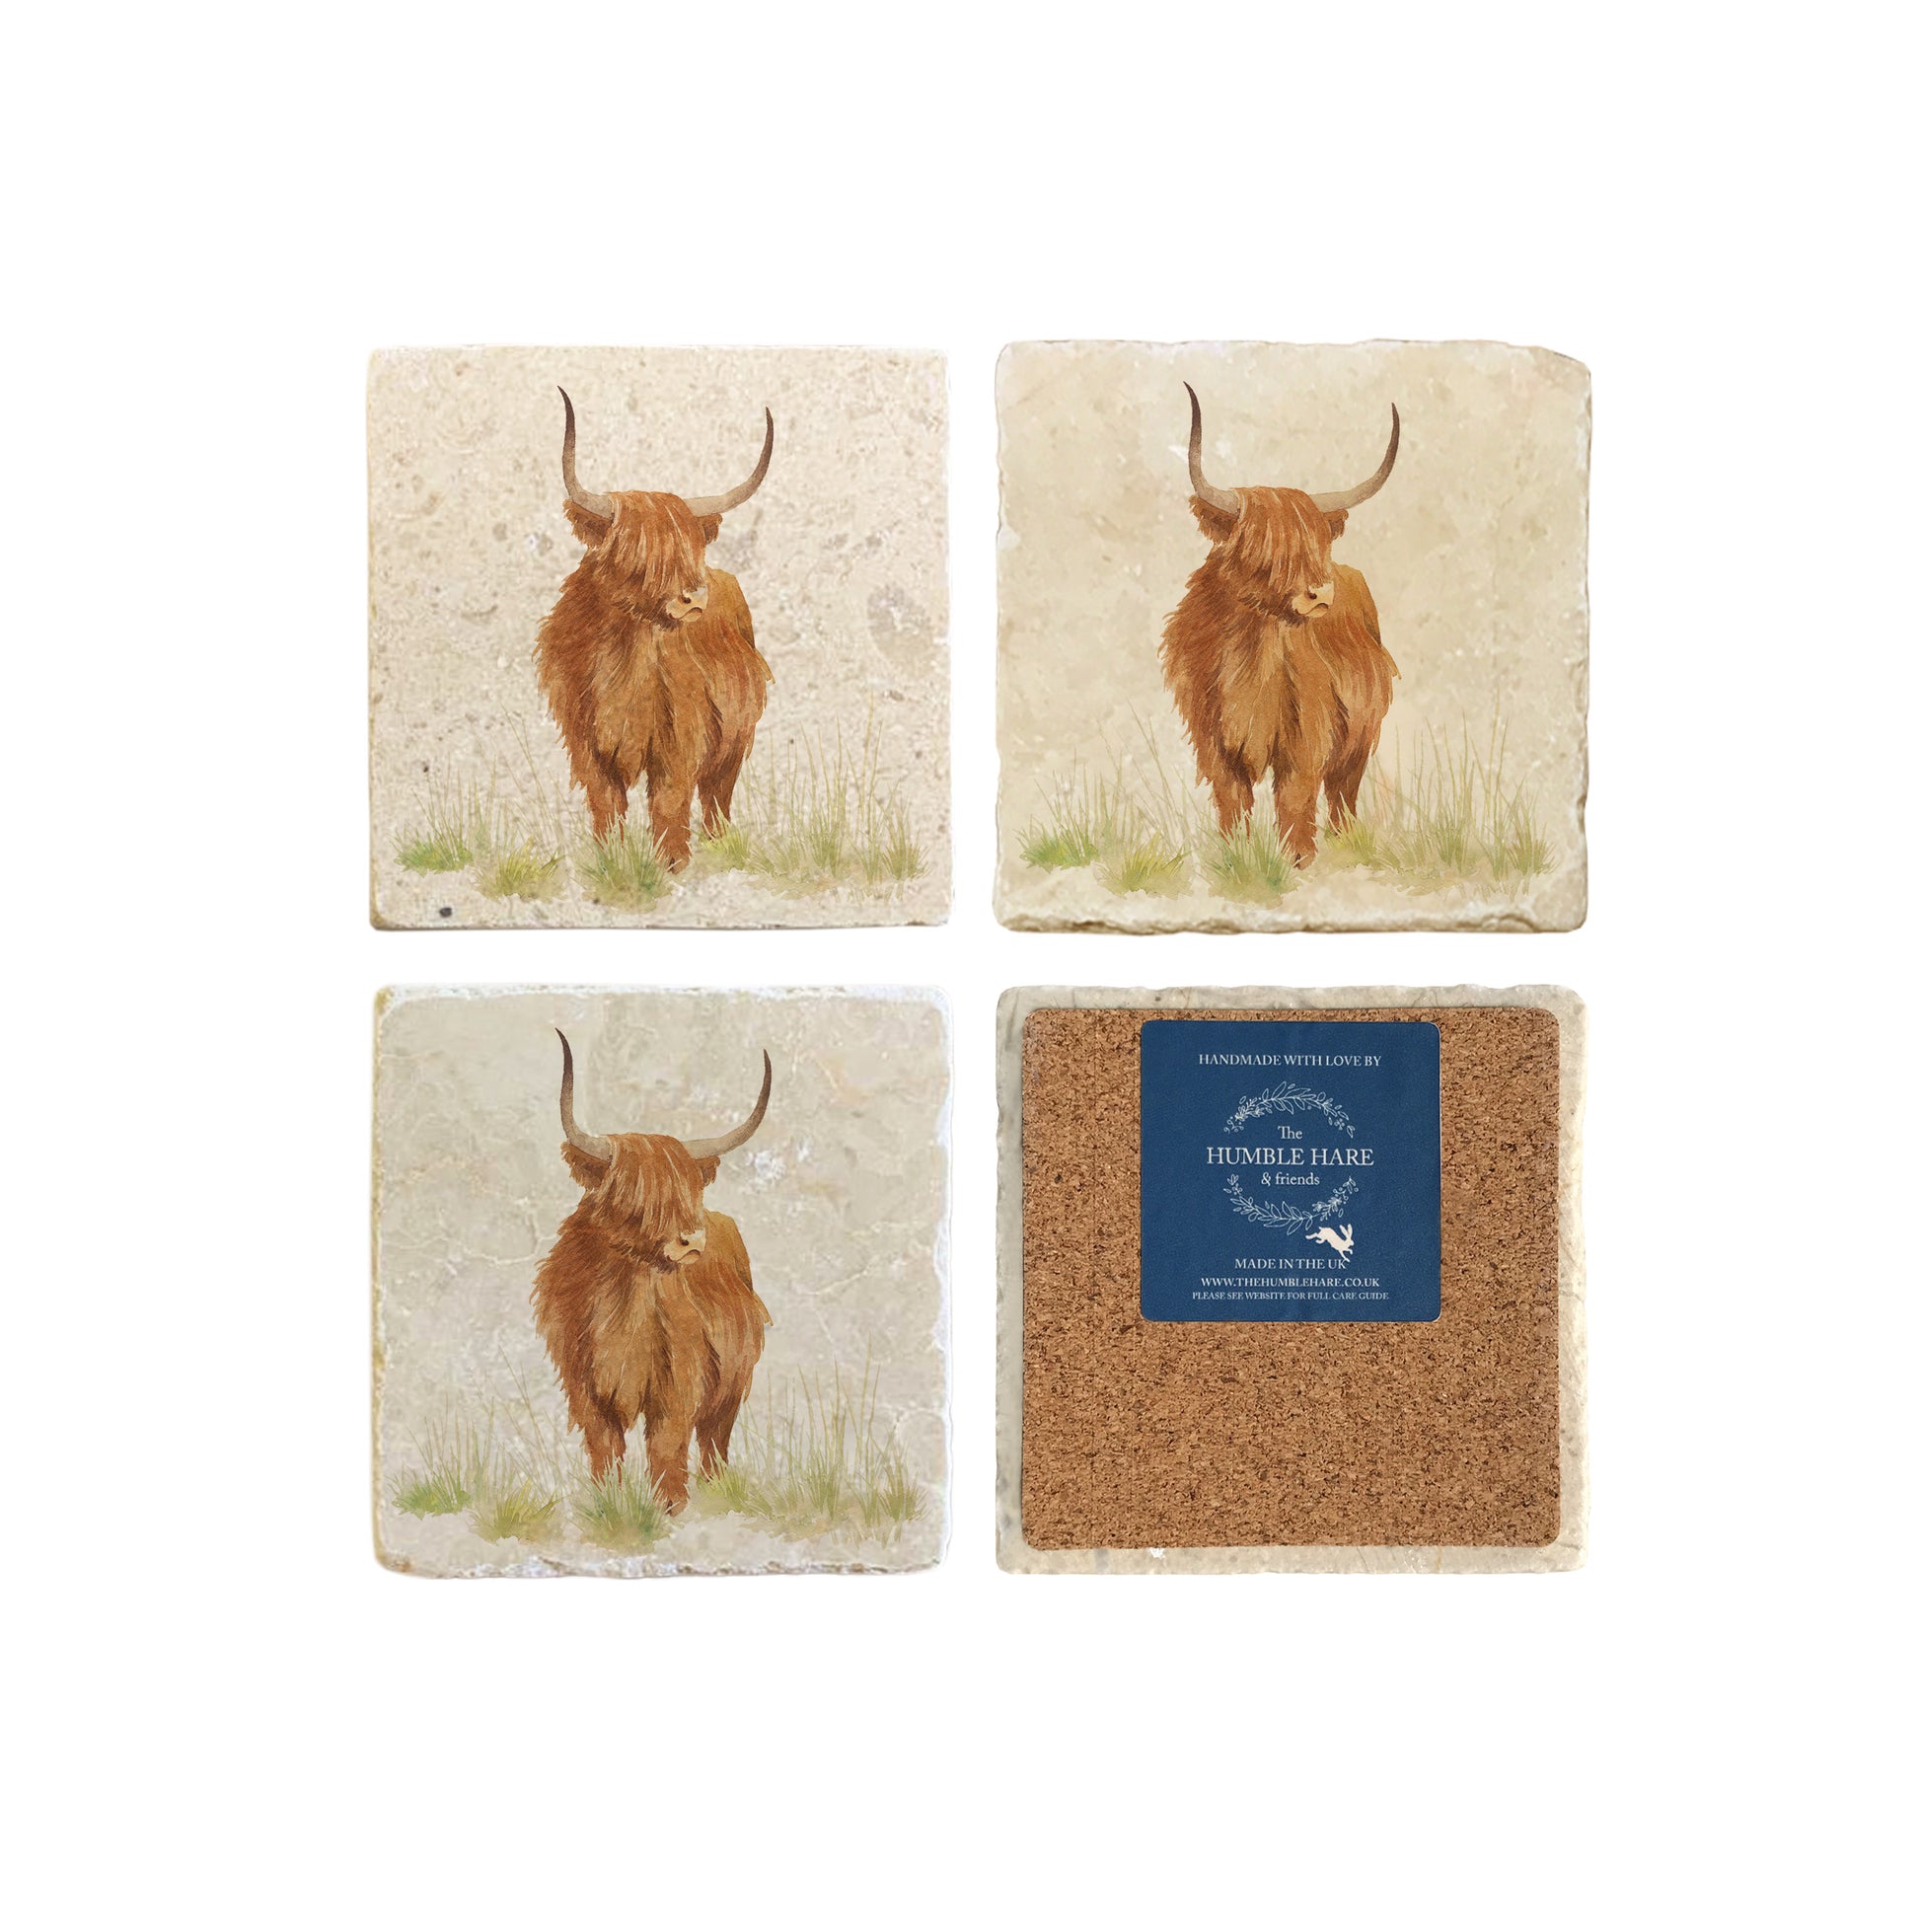 A set of 4 square marble coasters, featuring a watercolour design of a highland cow. One coaster is flipped to show that the coasters are backed with cork.